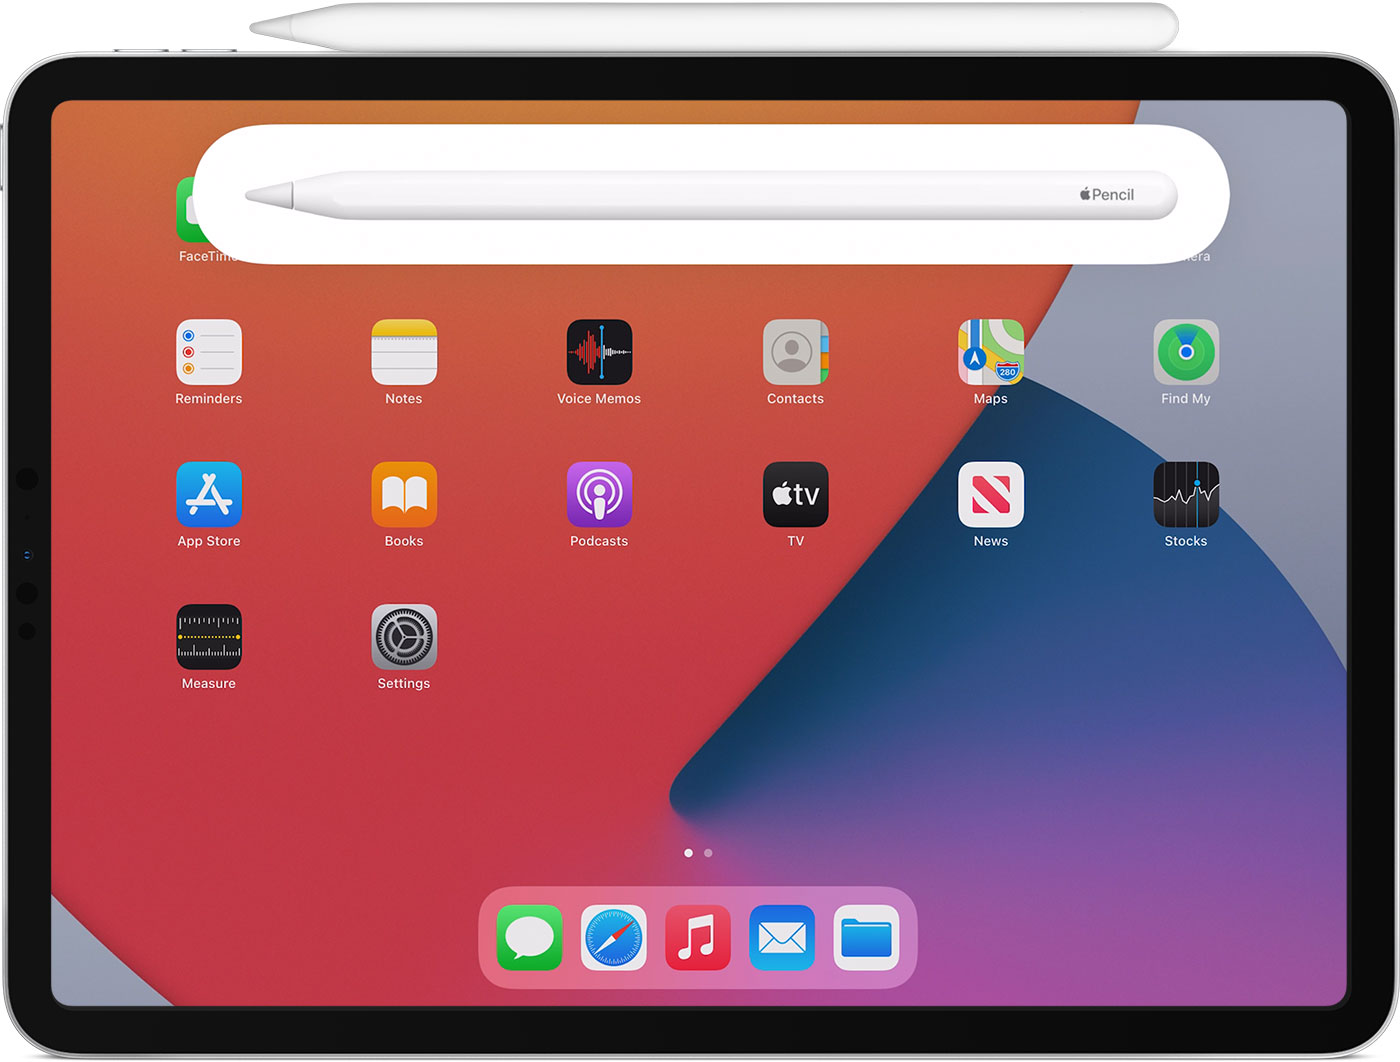 Connect Apple Pencil with your iPad